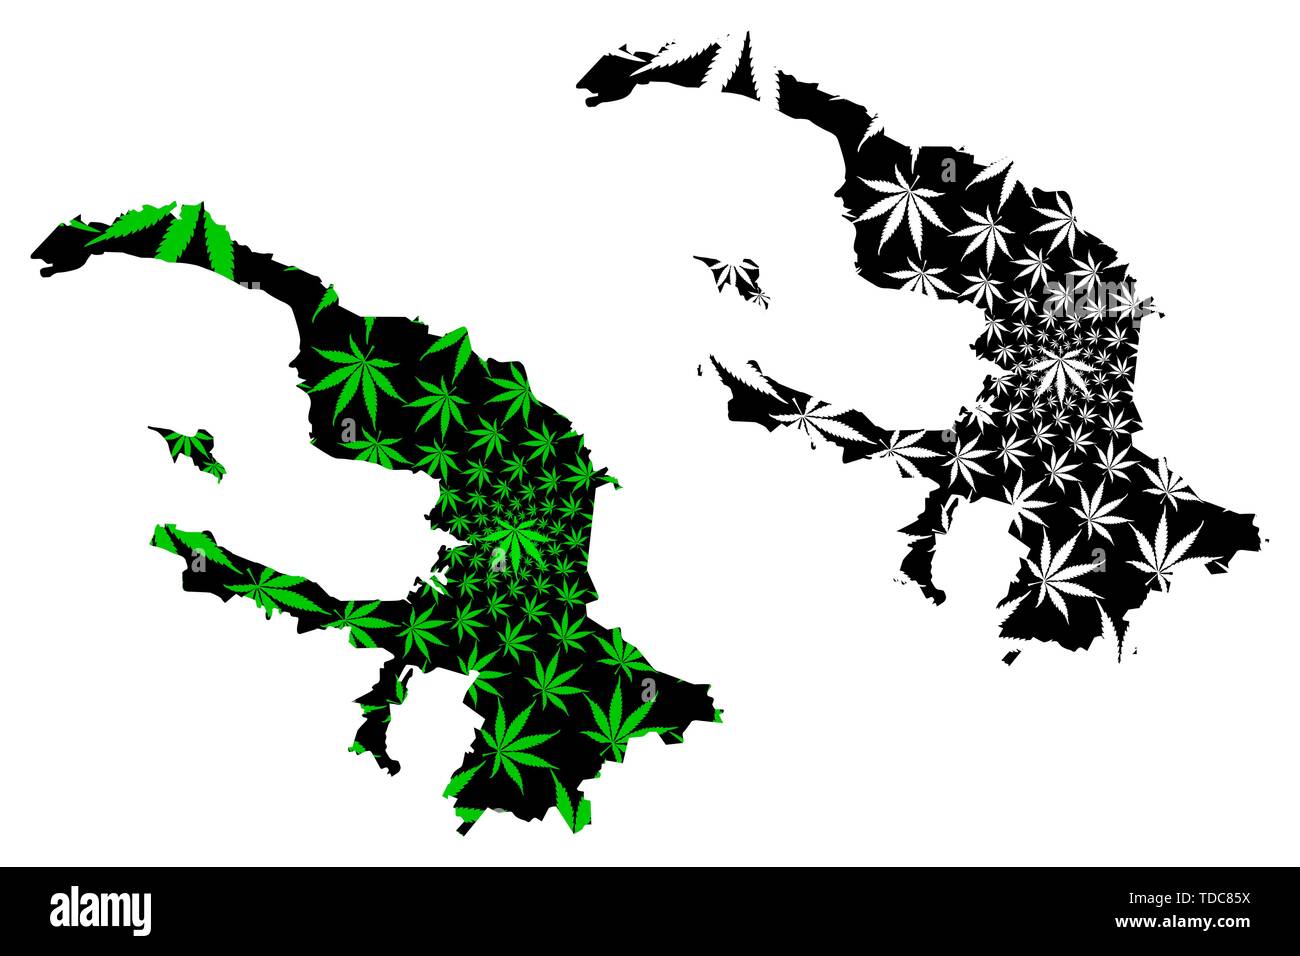 Saint Petersburg (Russia, Federal cities of Russia) map is designed cannabis leaf green and black, Saint Petersburg (Leningrad, Petrograd) map made of Stock Vector